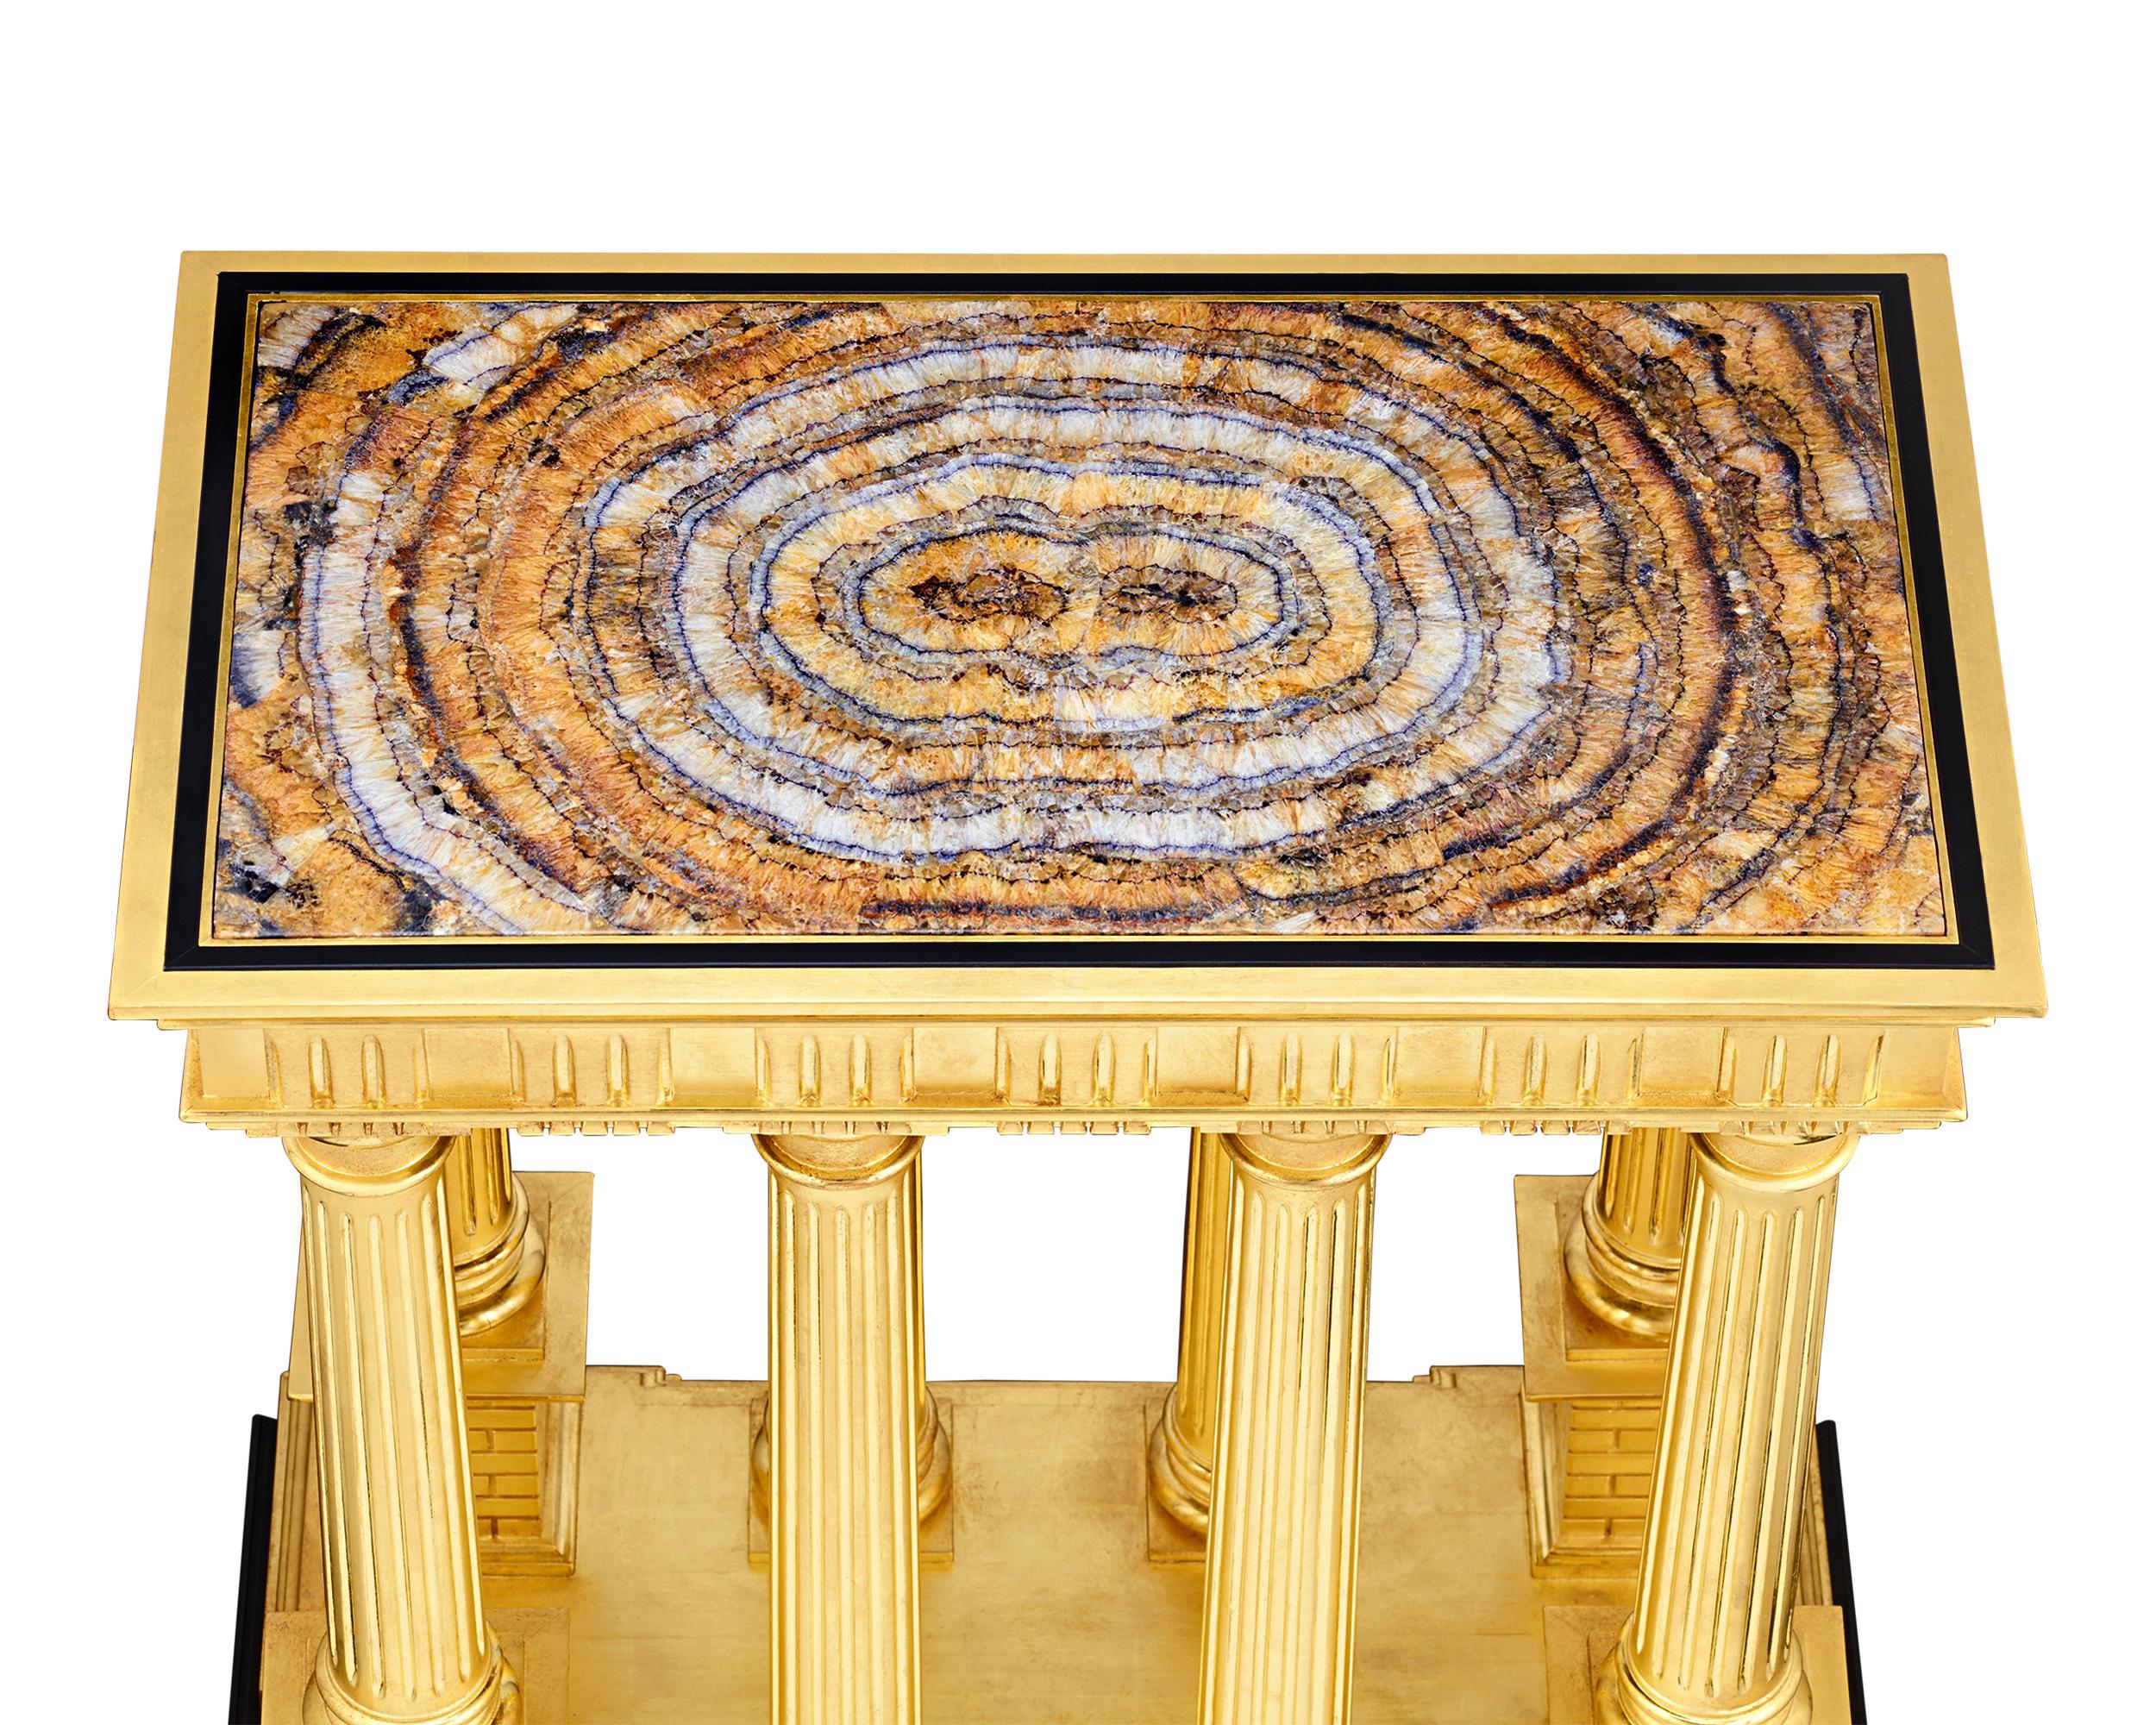 An especially fine and incredibly large example of rare Blue John is inset into the surface of this neoclassical giltwood table. The hardstone possesses all the best qualities of this rare semiprecious mineral, from its radiating crystalline